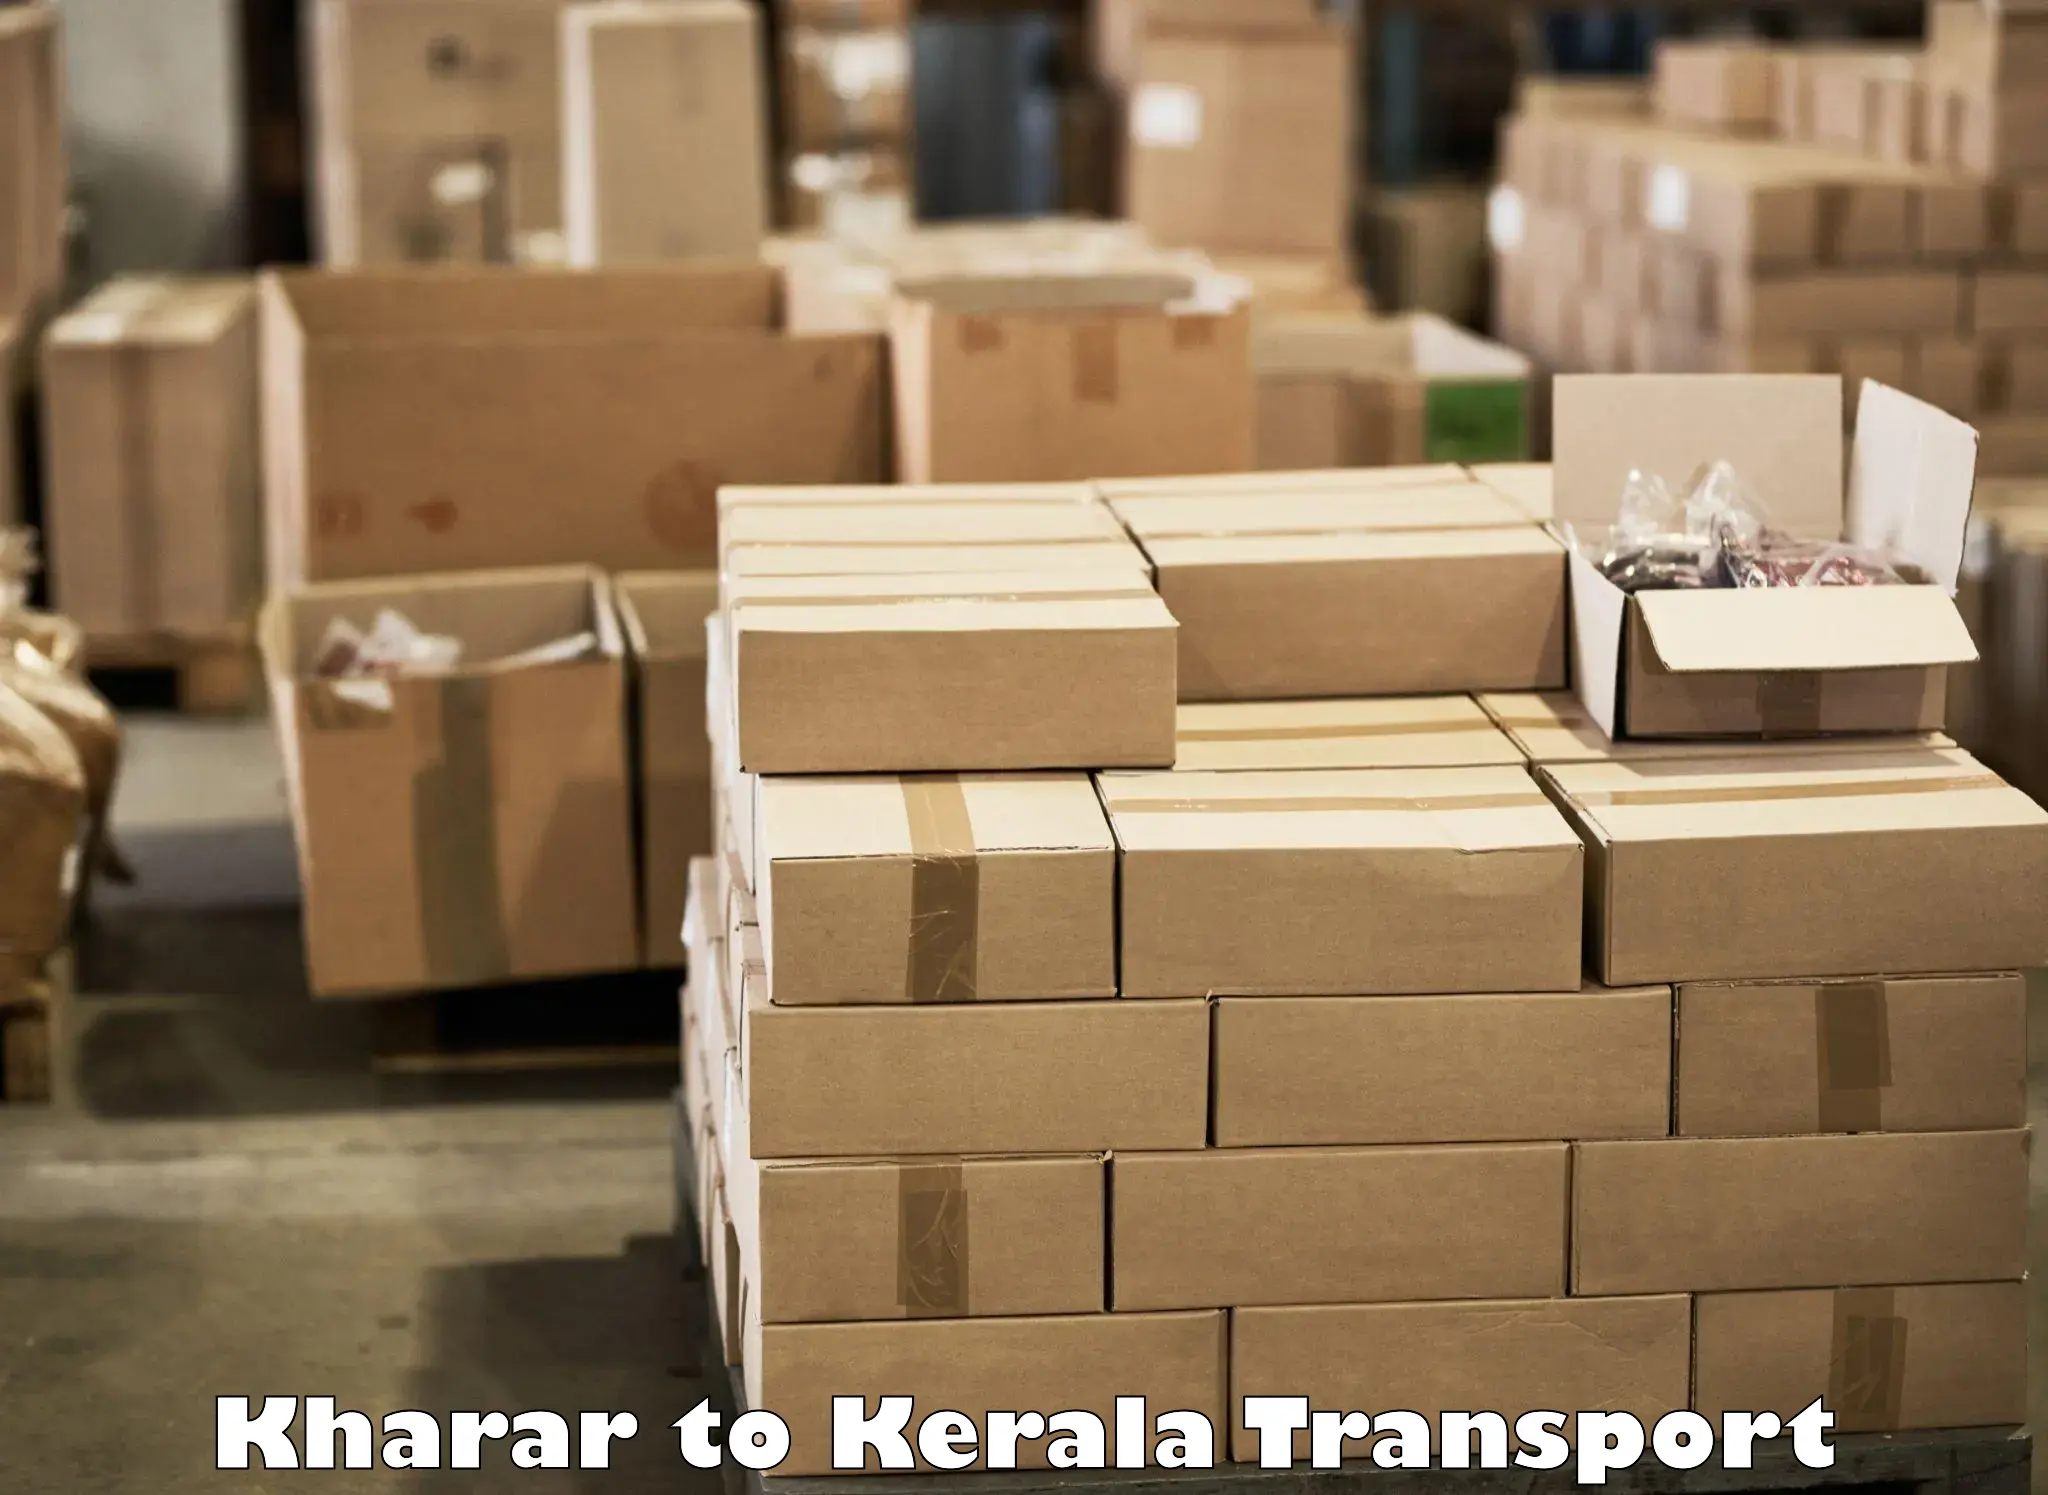 Container transport service Kharar to Rajamudy